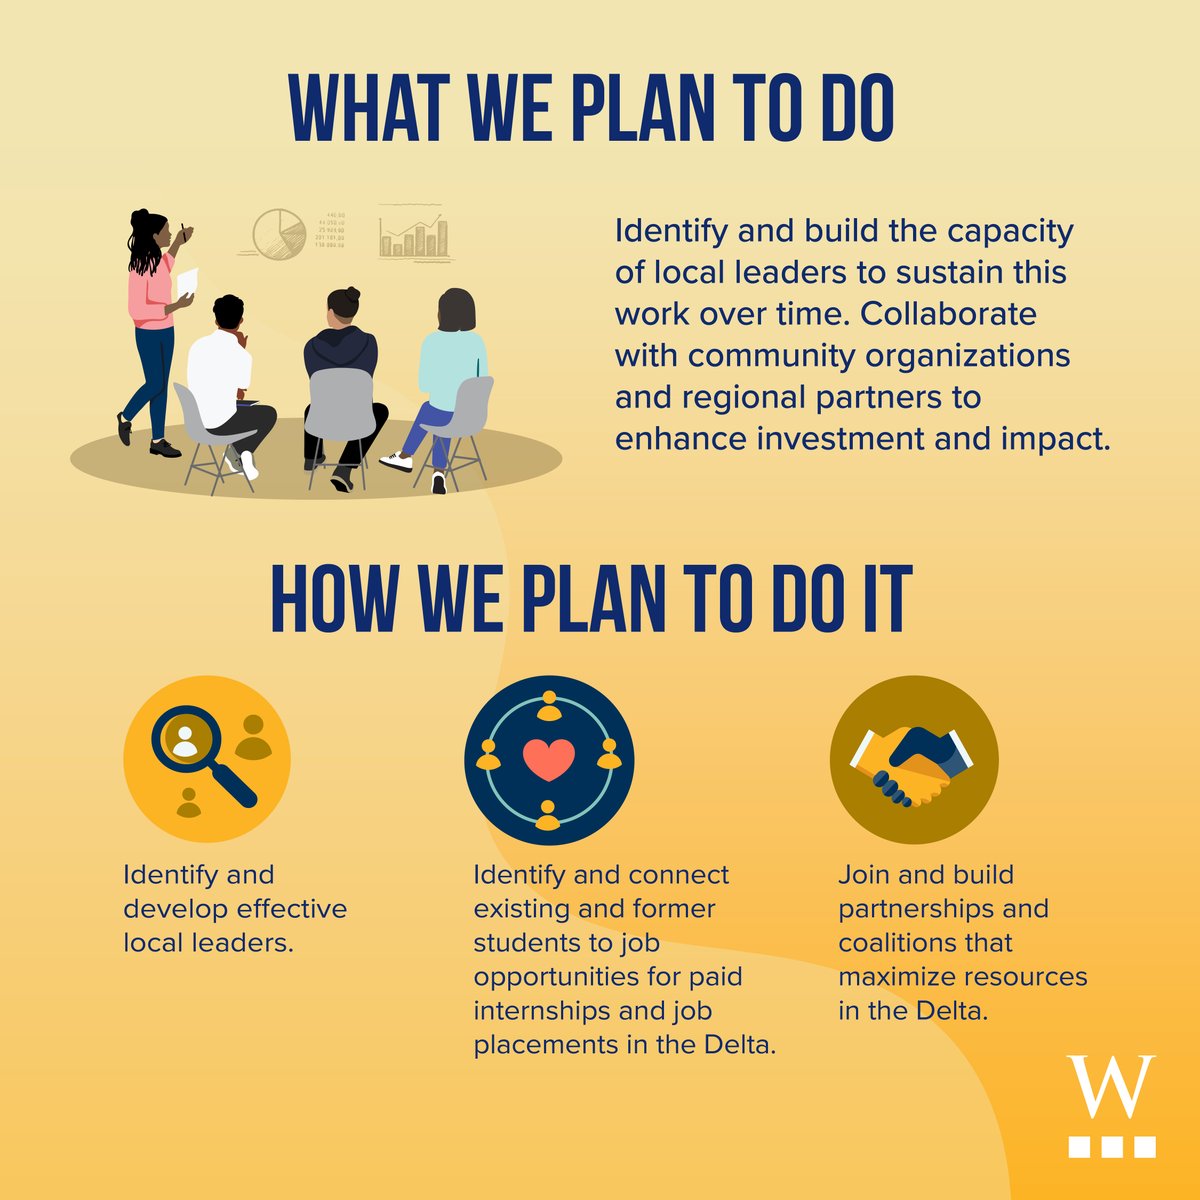 For more than 30 years, we’ve been helping leaders in the Delta build lasting impact. But big change requires a roadmap for collaboration, which is why we worked with the community to create our Theory of Change playbook. Take a look: ow.ly/mrrw50RIpgM